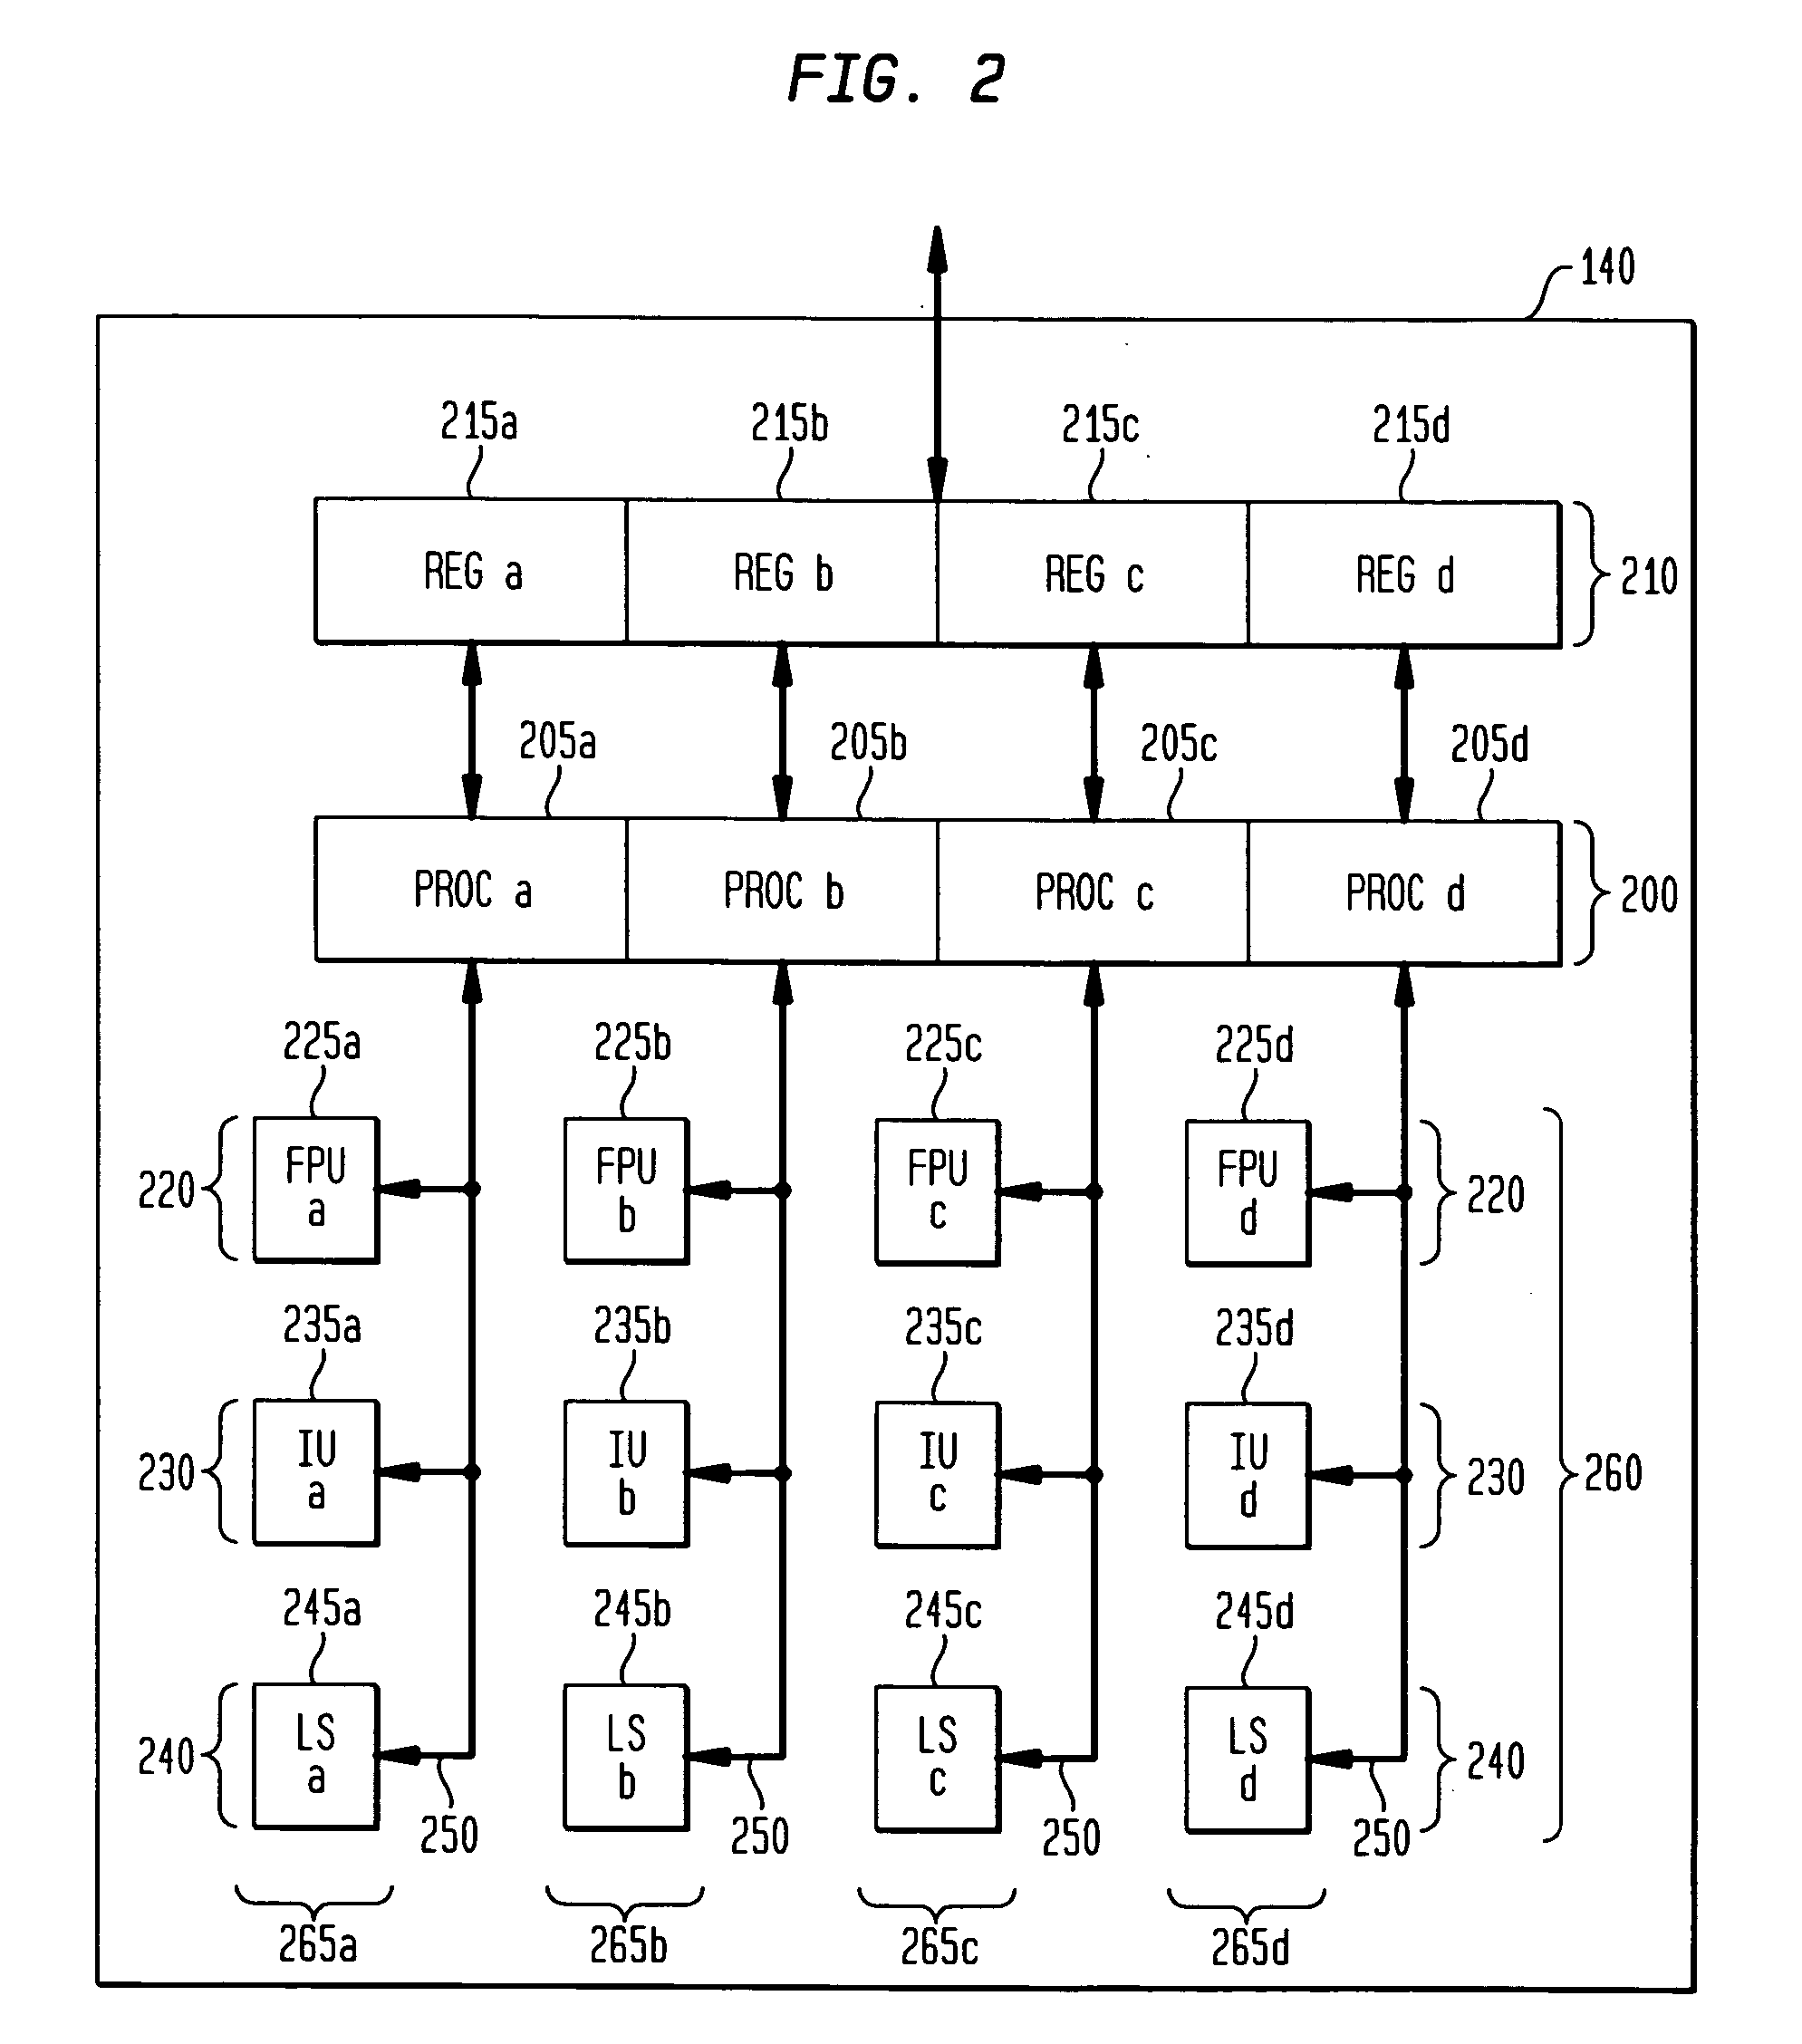 Methods and apparatus for address map optimization on a multi-scalar extension